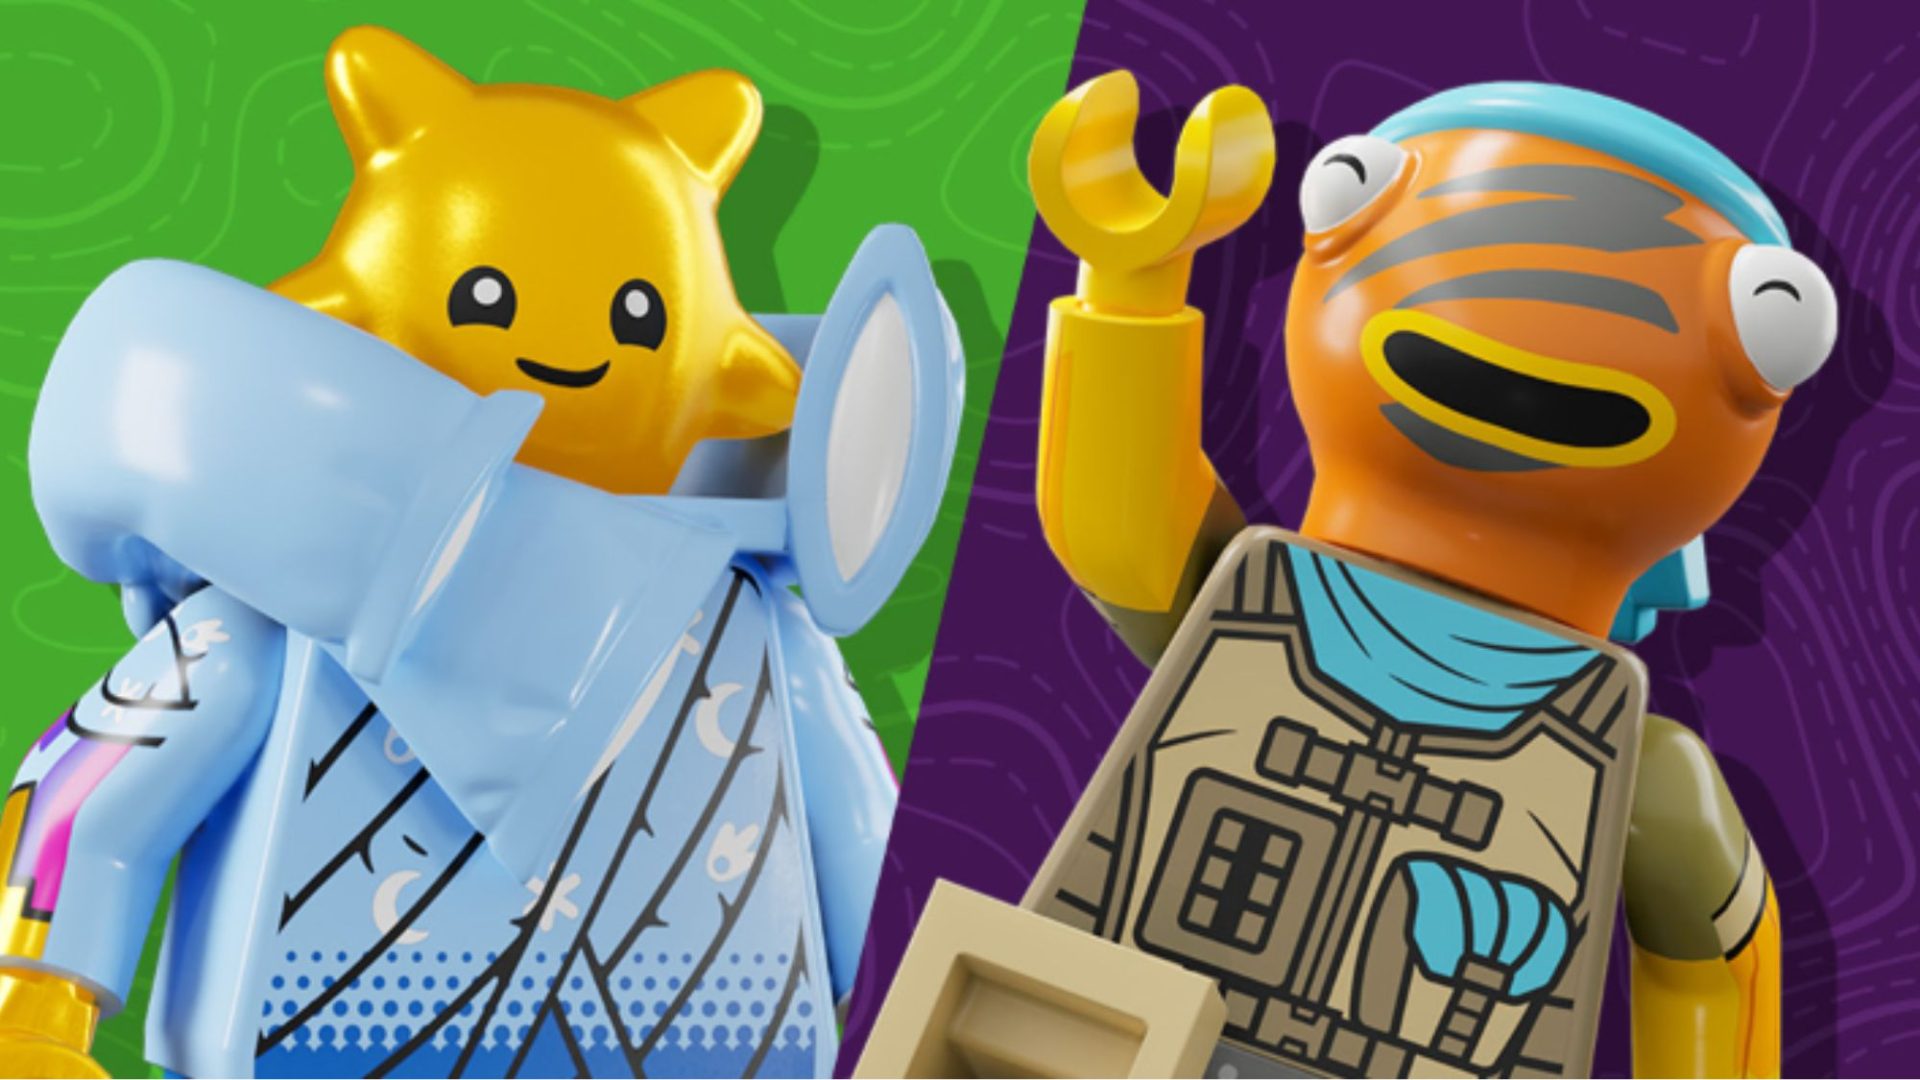 Next Lego Fortnite update to add Cozy and Permadeath Expert modes